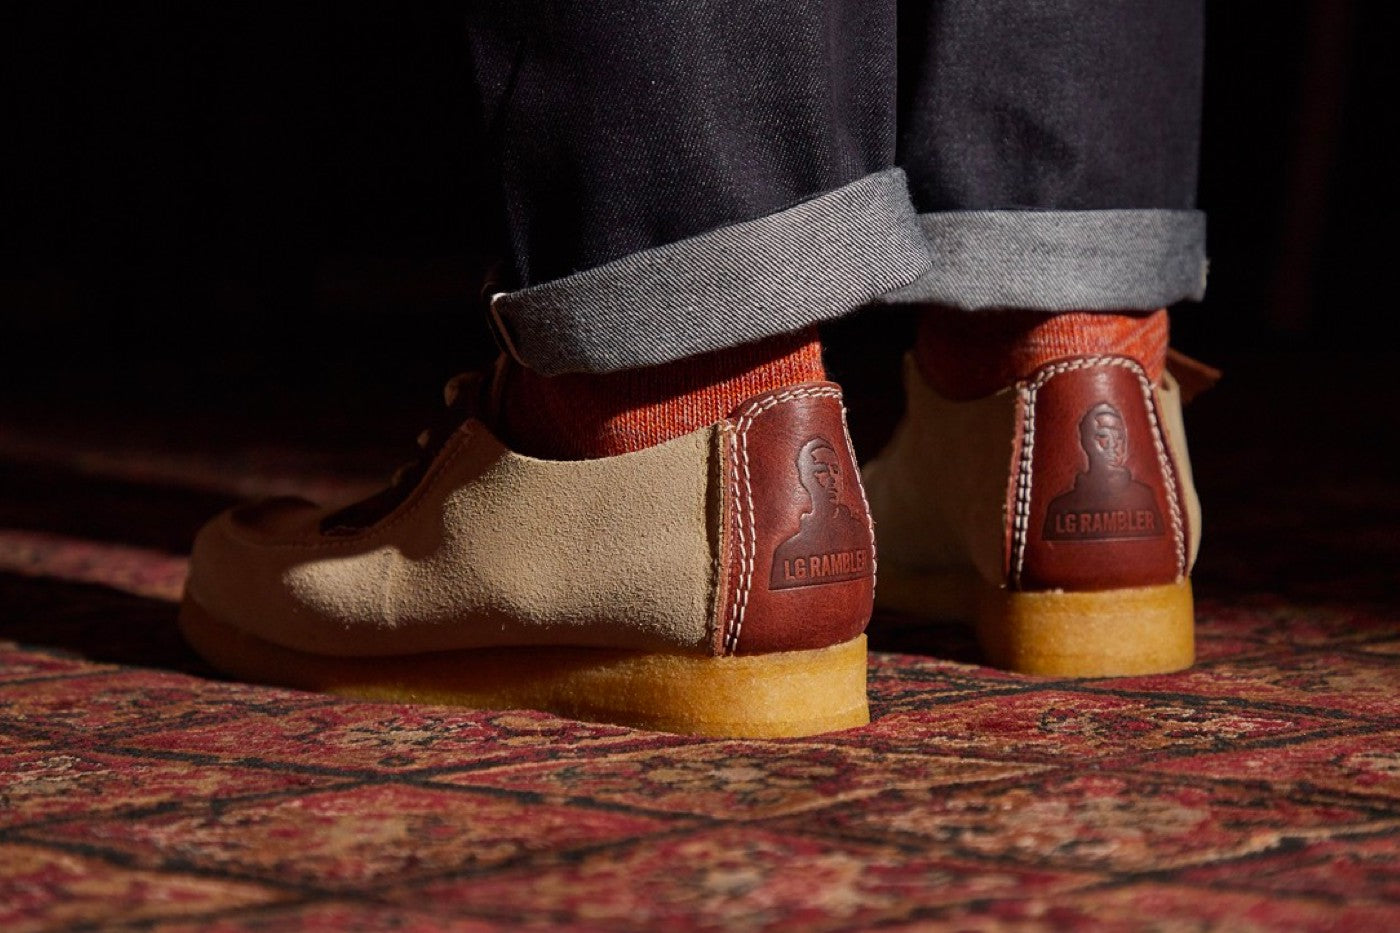 Liam Gallagher and Clarks Come Together to Bring Back the Rambler